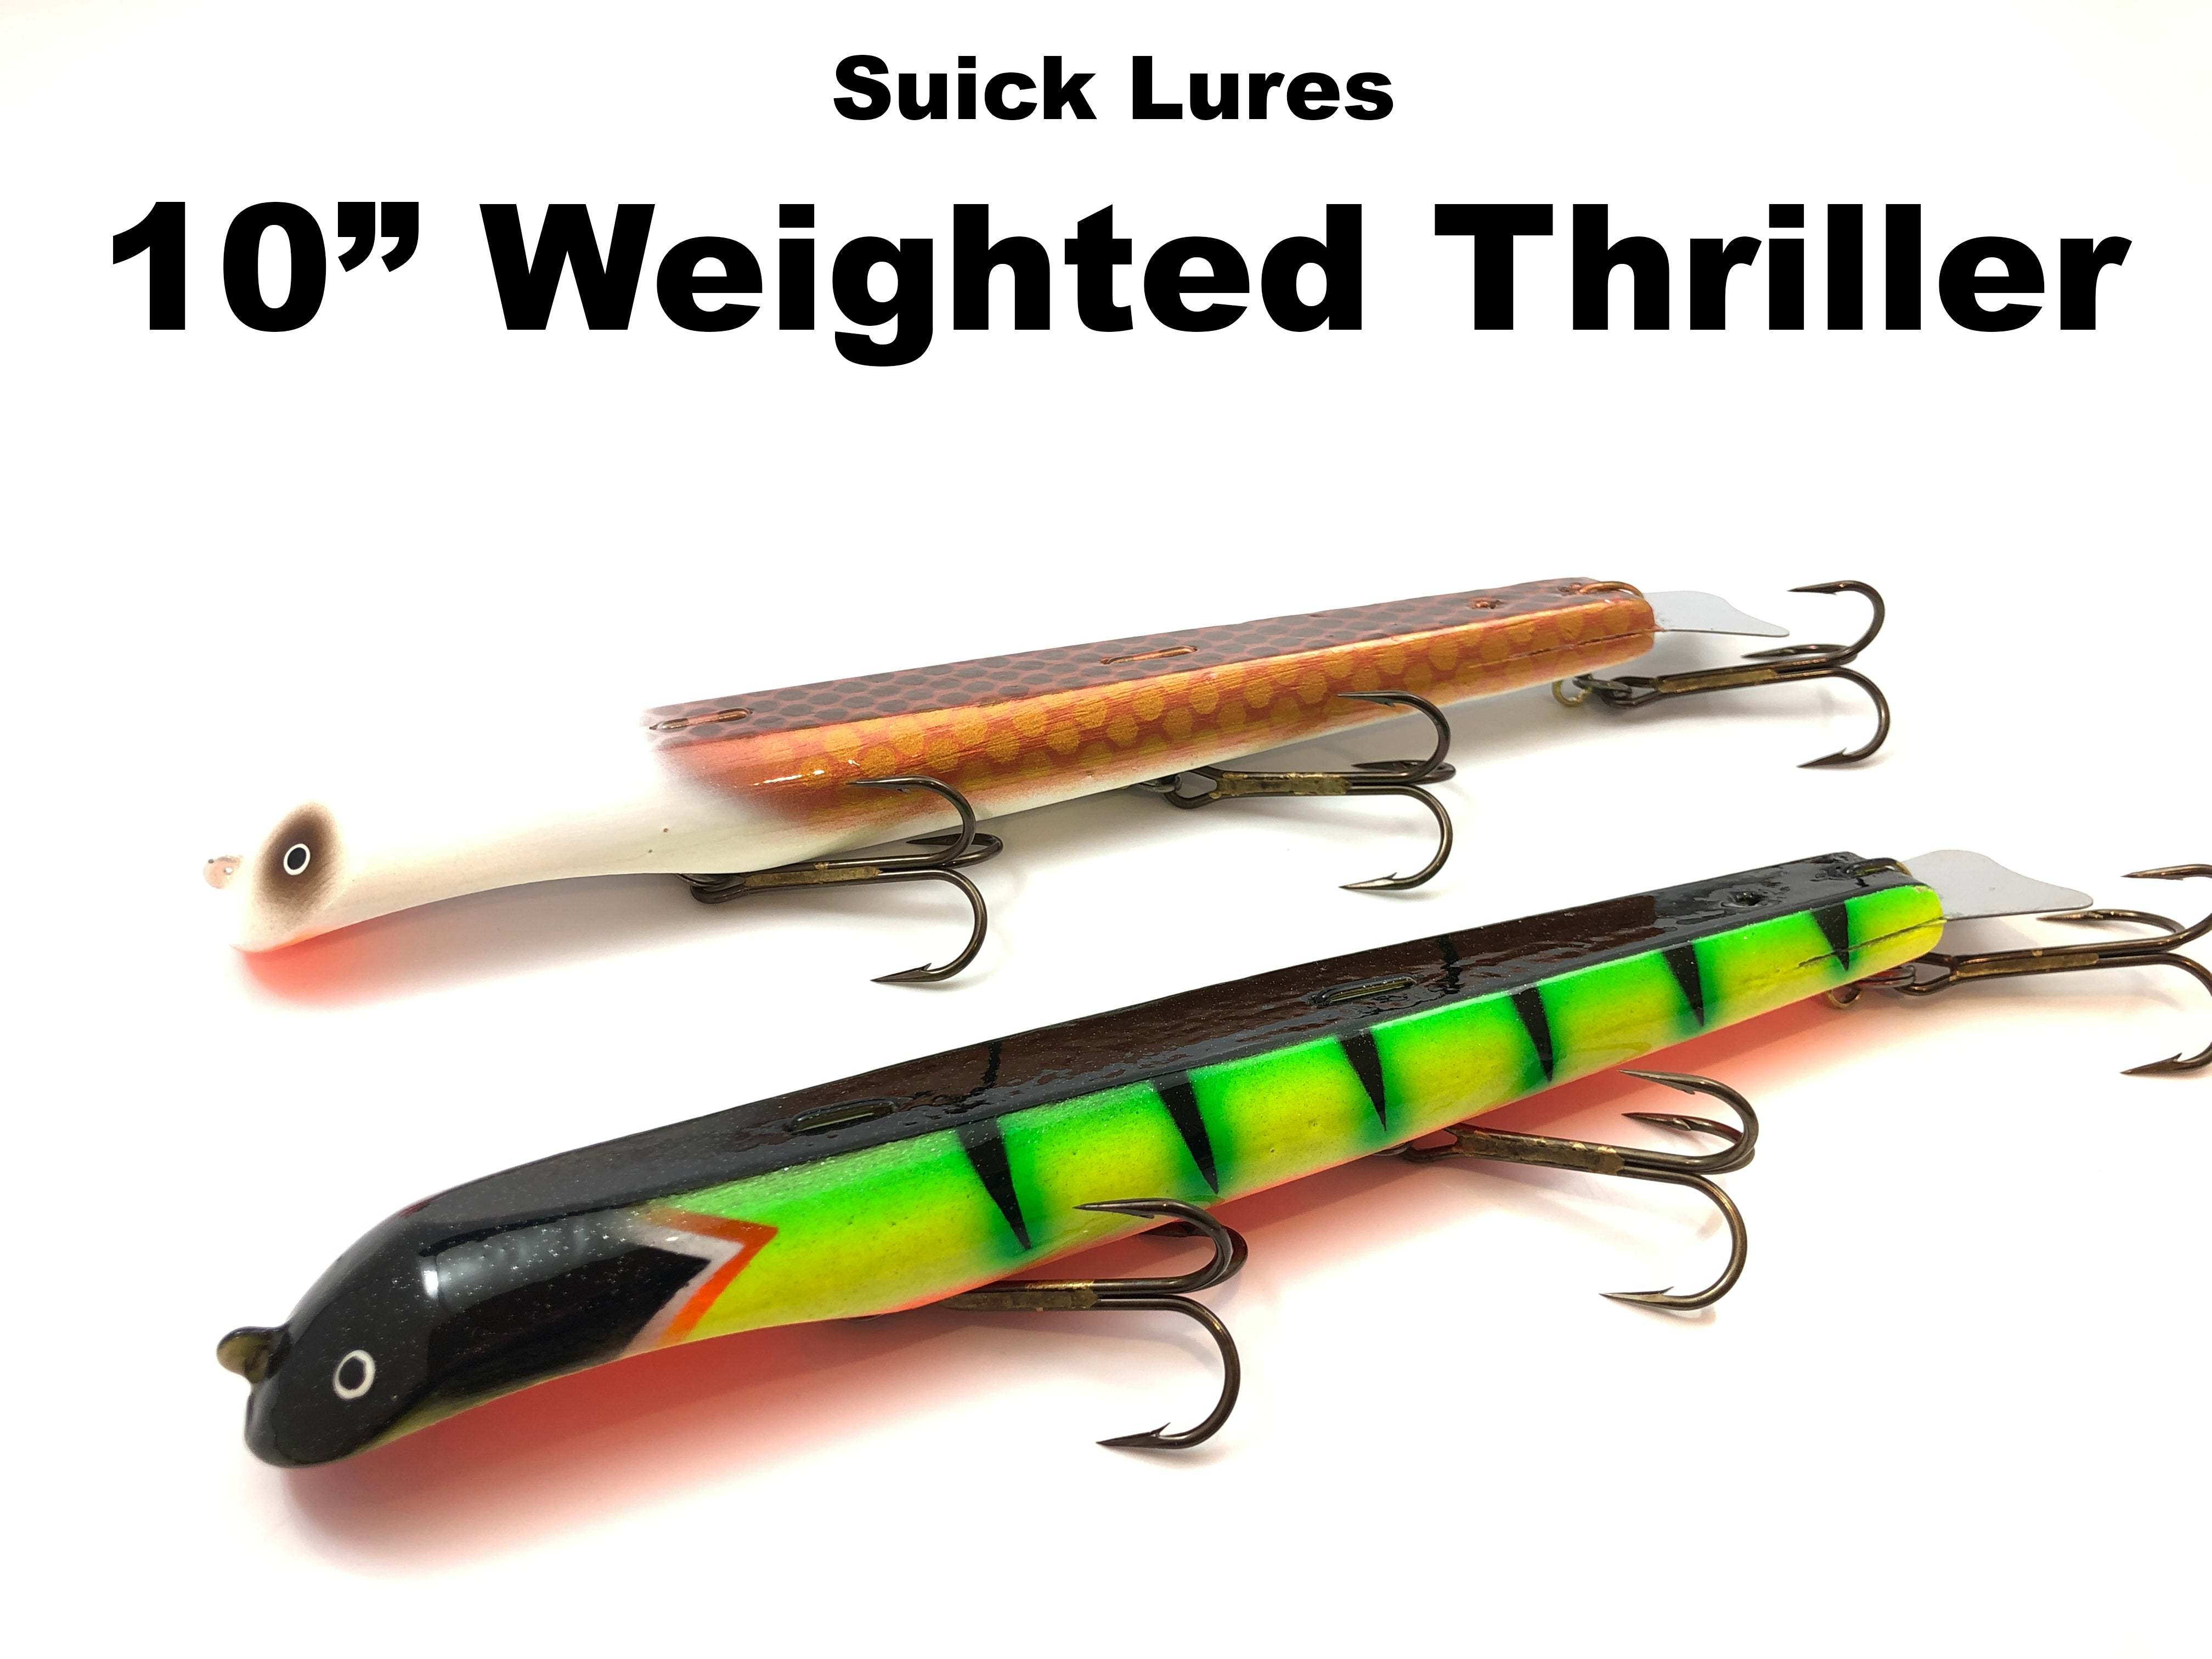 Suick Lures Musky Fishing Crankbaits And Muskie Fishing, 60% OFF